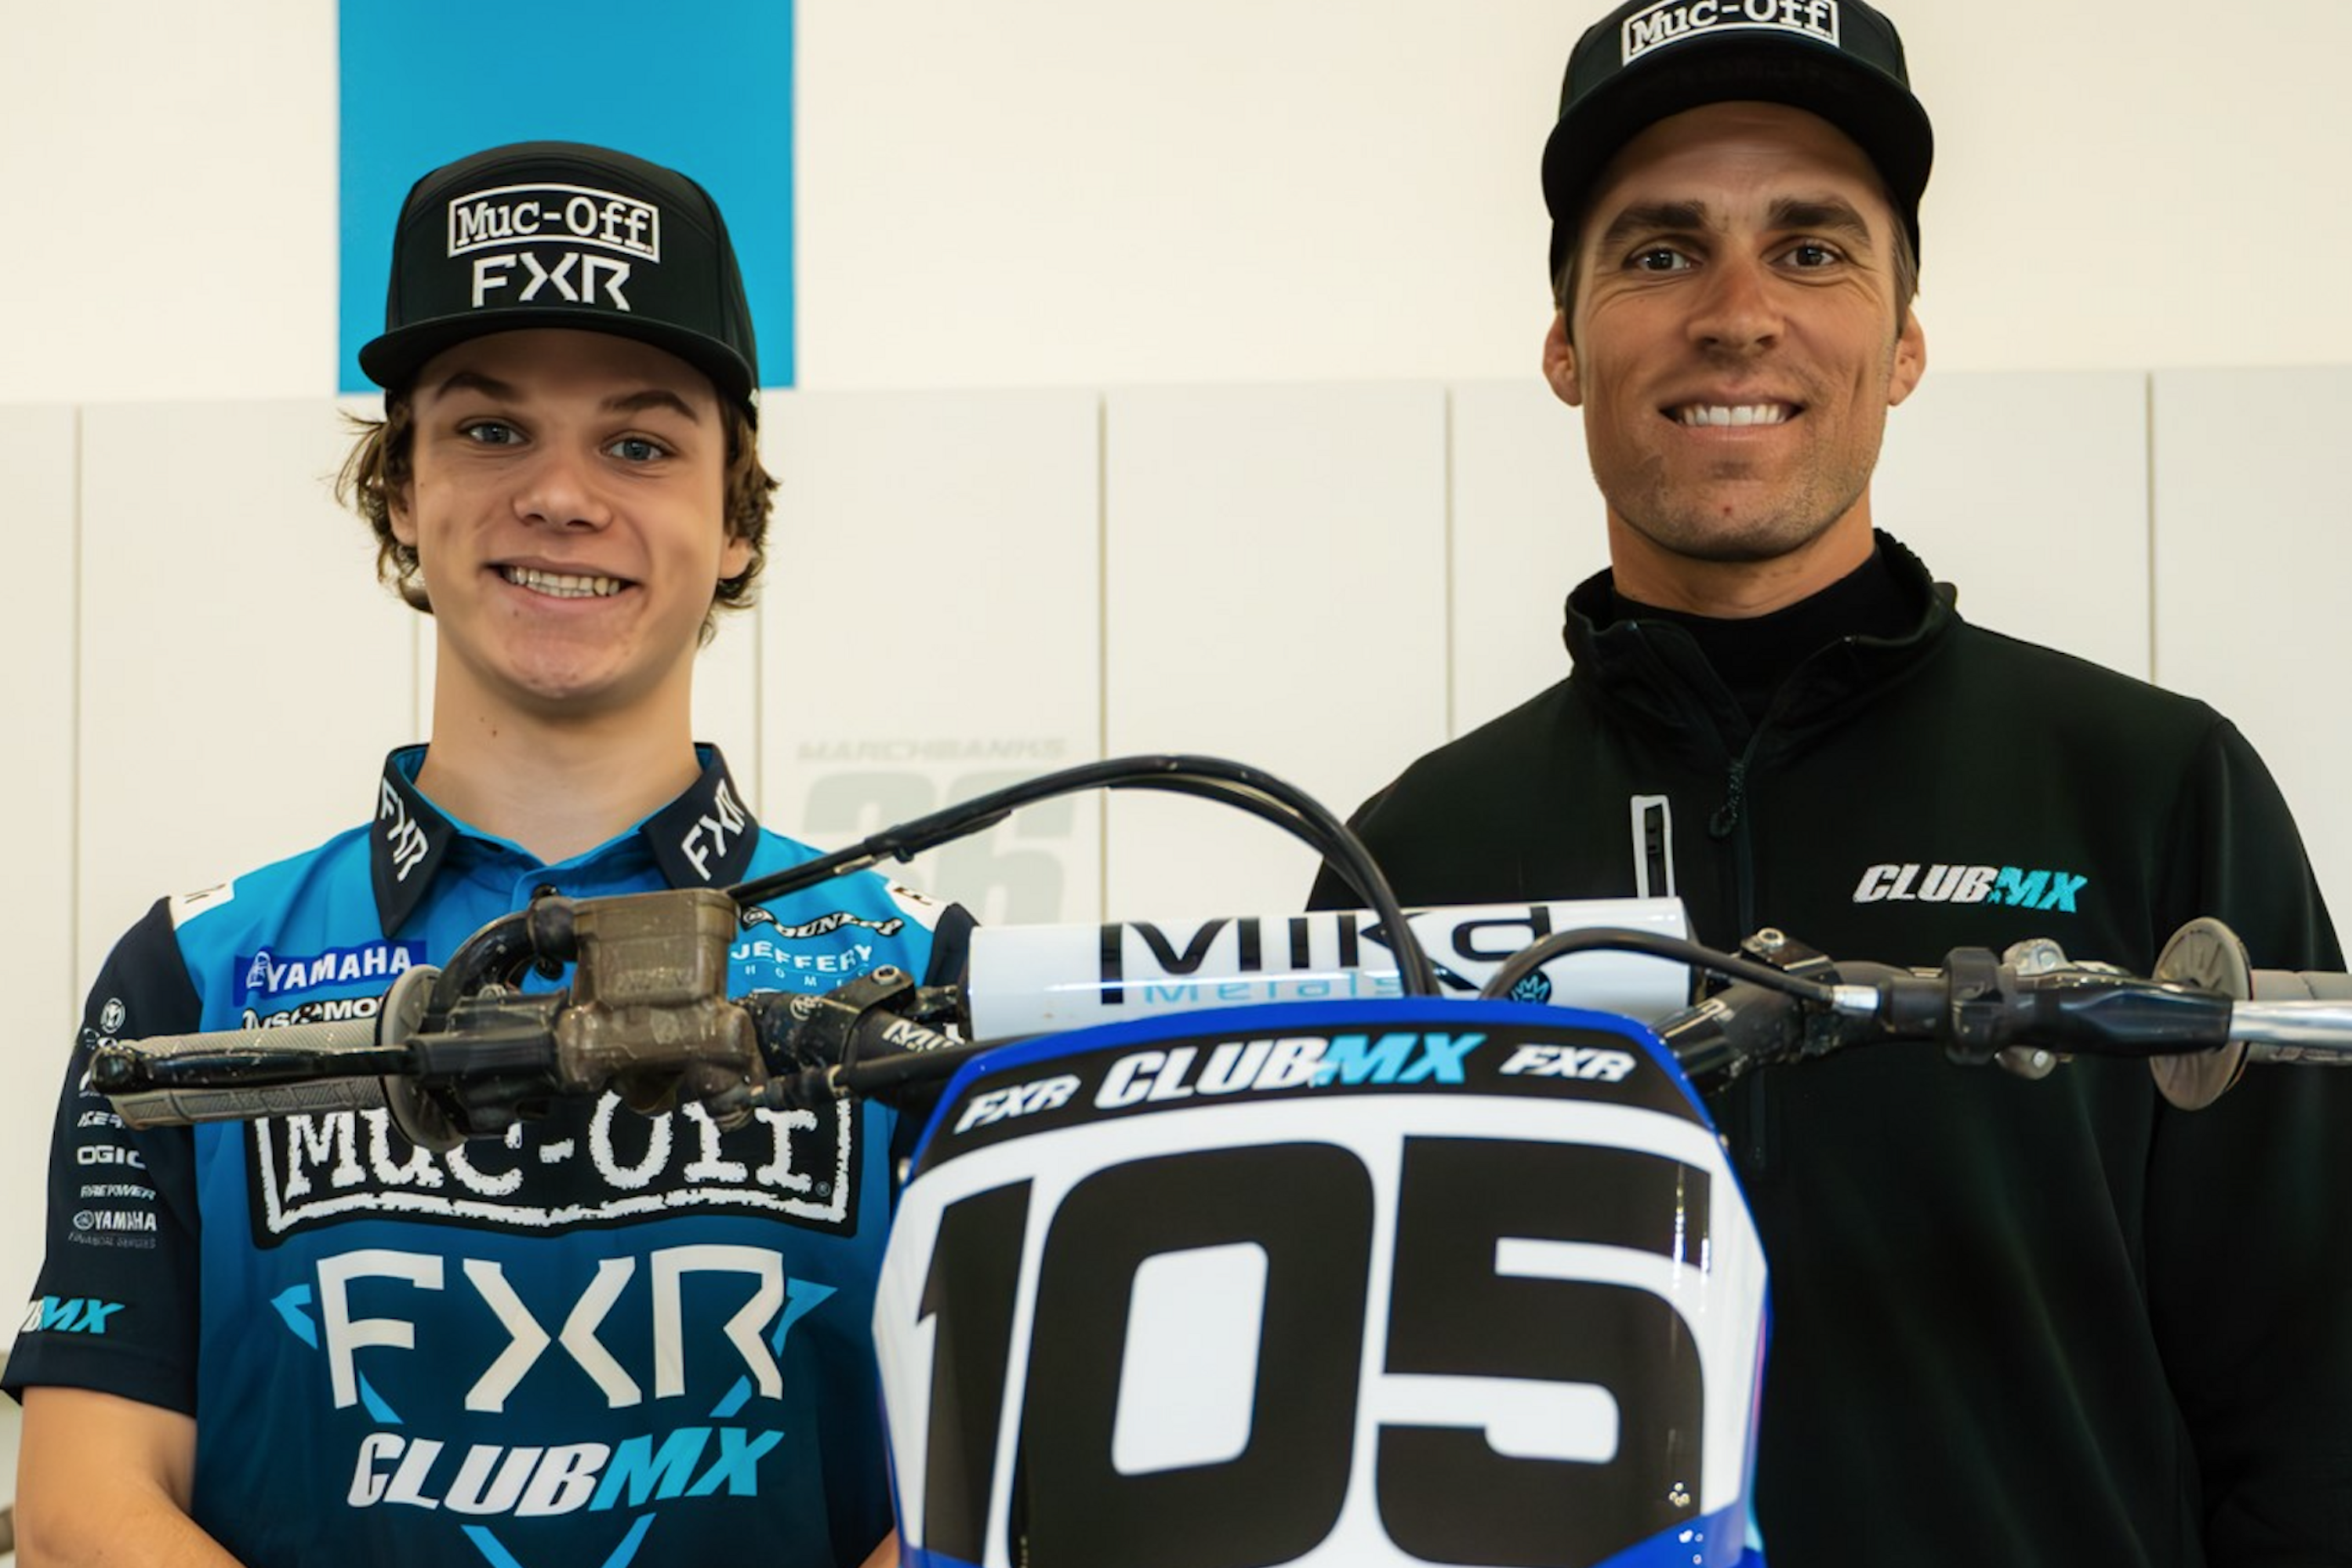 Mark Fineis Signed to ClubMX for SX Futures, Full Motocross